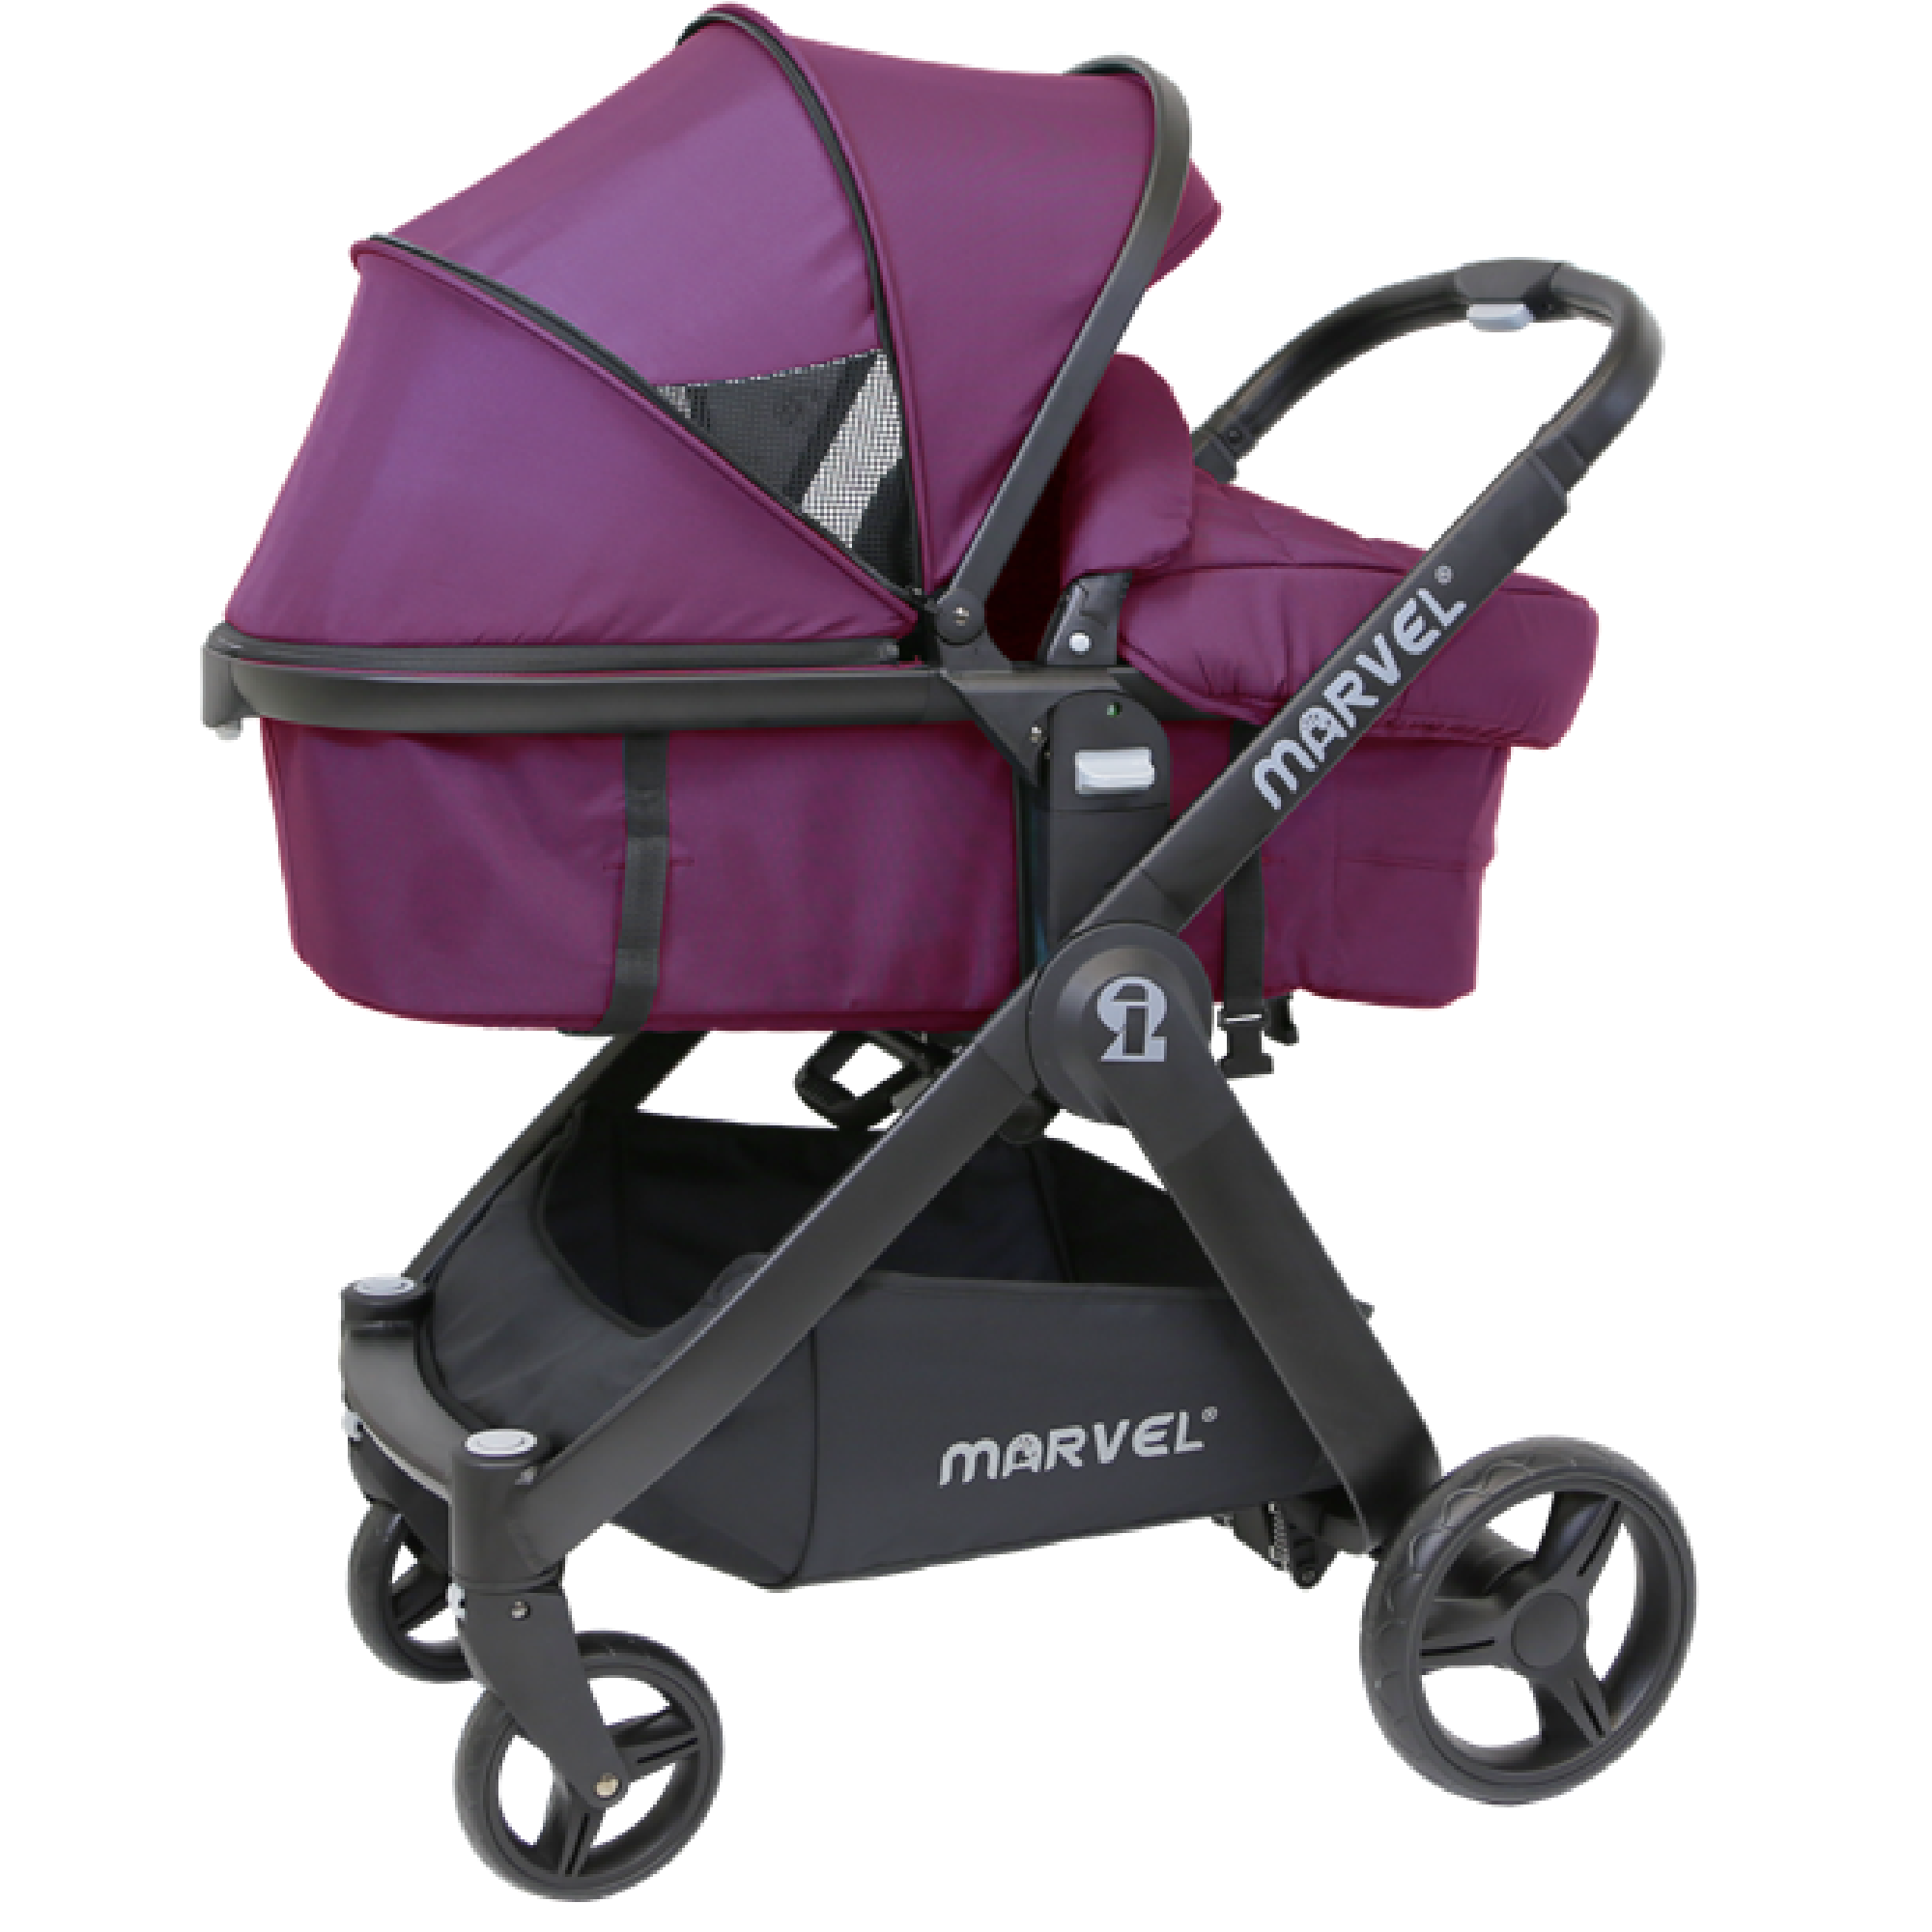 isafe travel system reviews